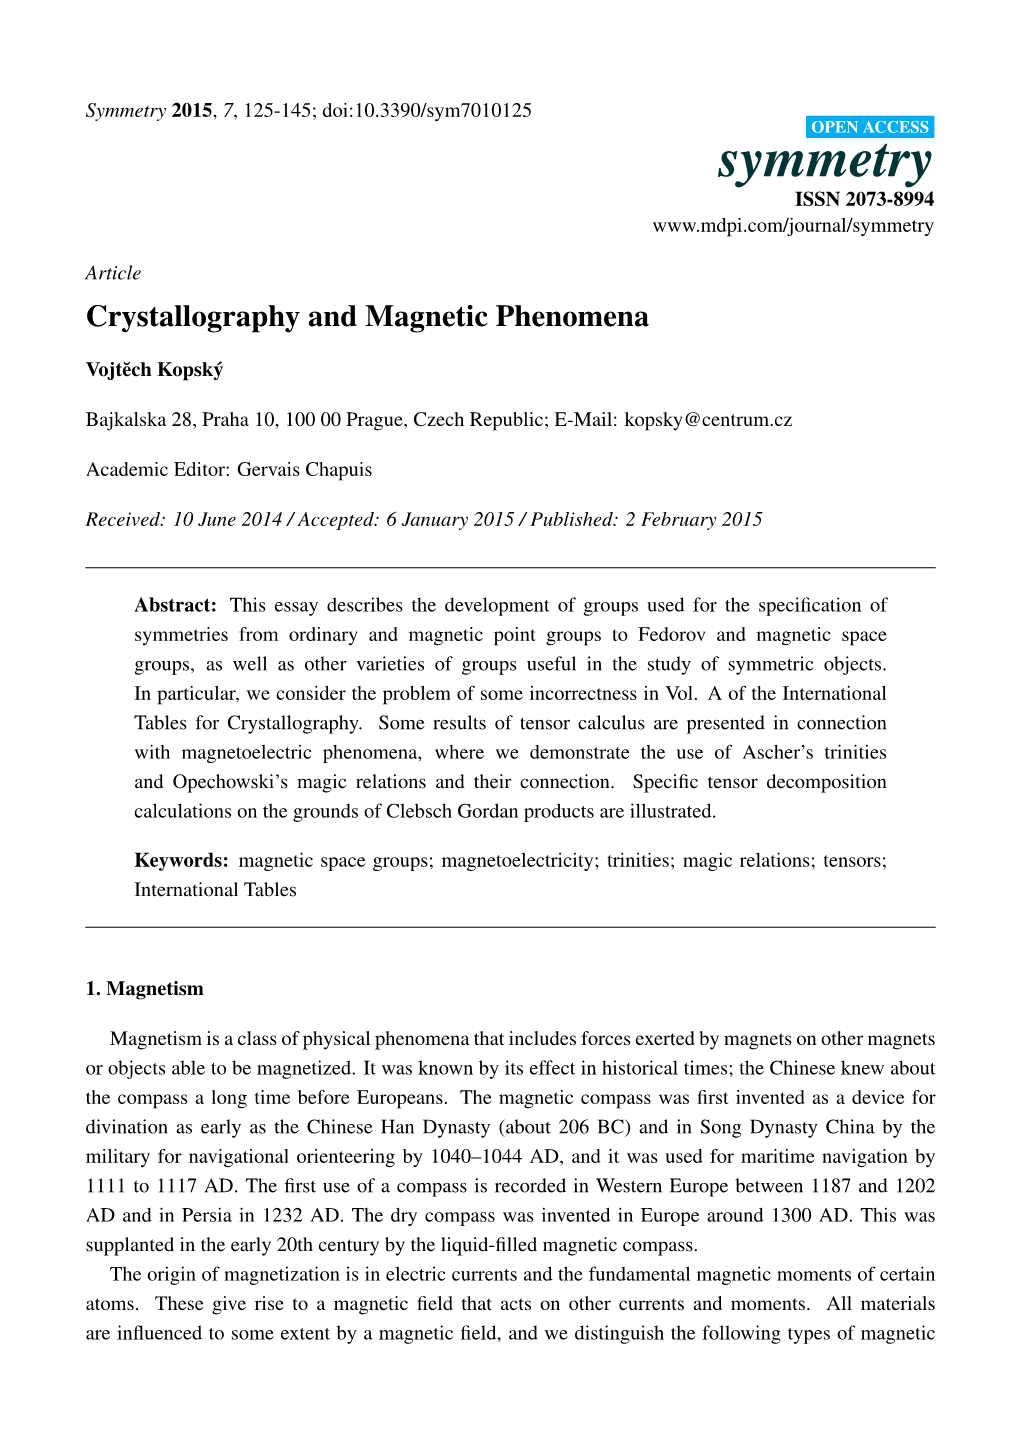 Crystallography and Magnetic Phenomena